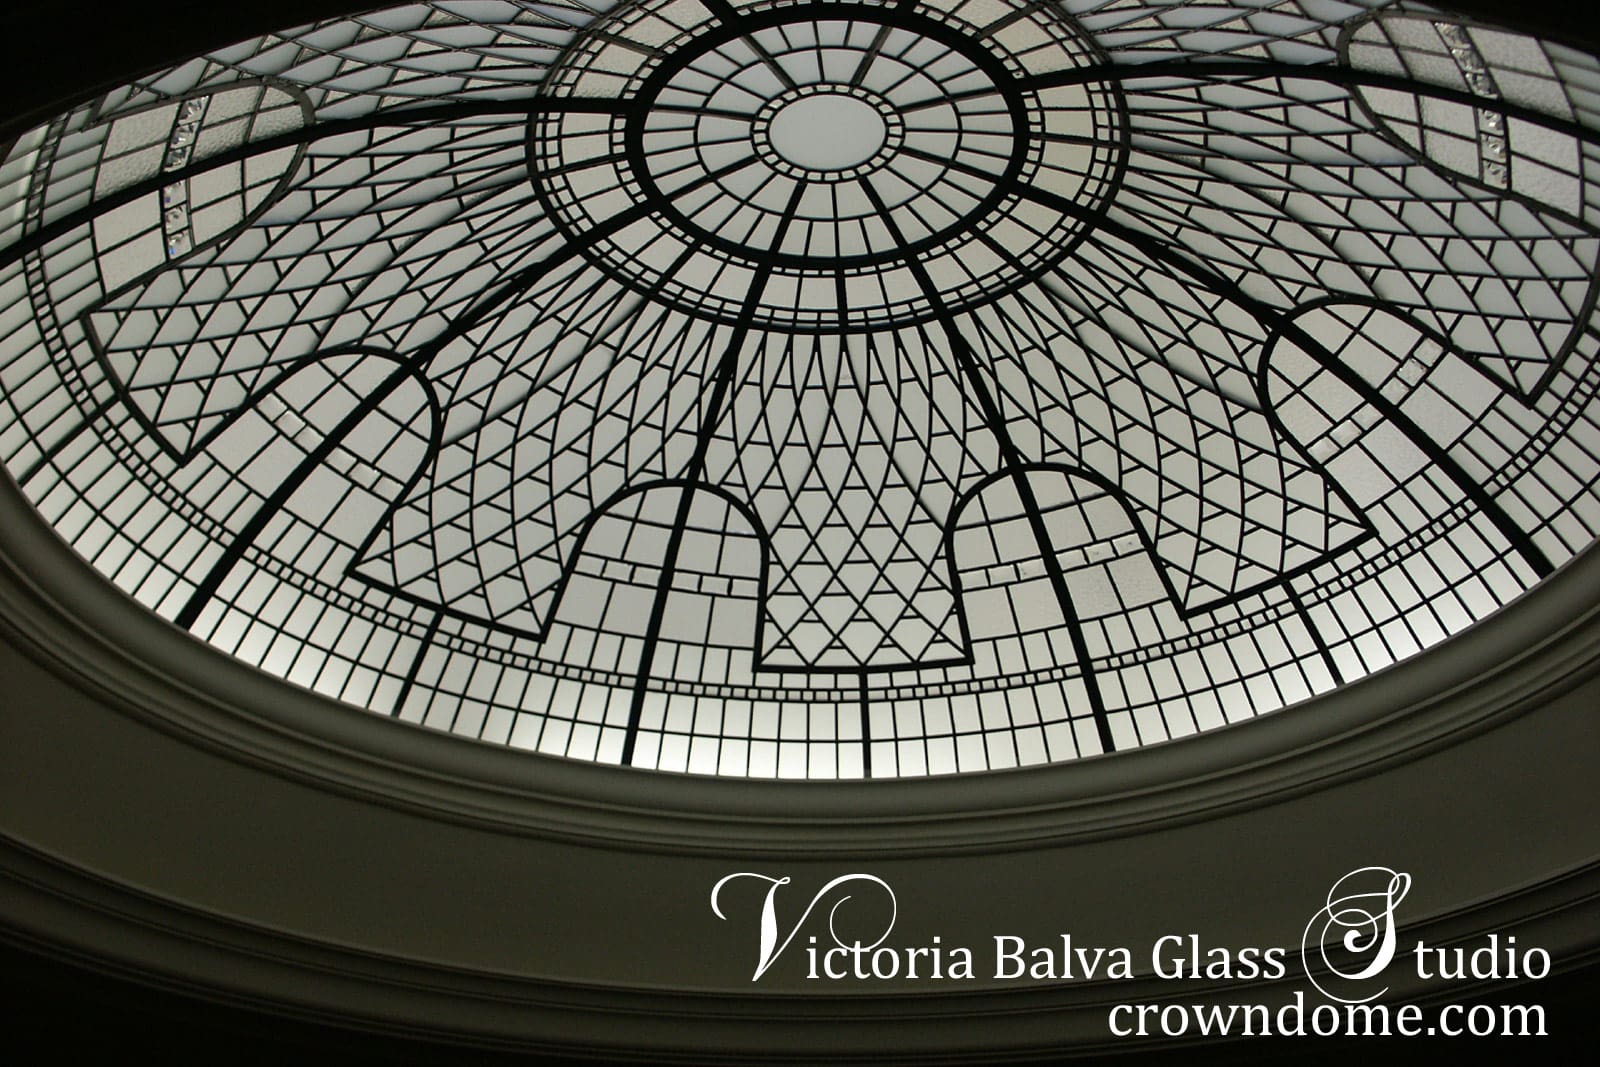 Custom designed stained leaded glass dome skylight Great Neck, Long Island, New York custom built home. A beautiful elegant stained leaded glass dome in clear textured art glass for a decorative glass lay light by architectural glass artist Victoria Balva. Artistic glass Dome installation residential ceiling skylight